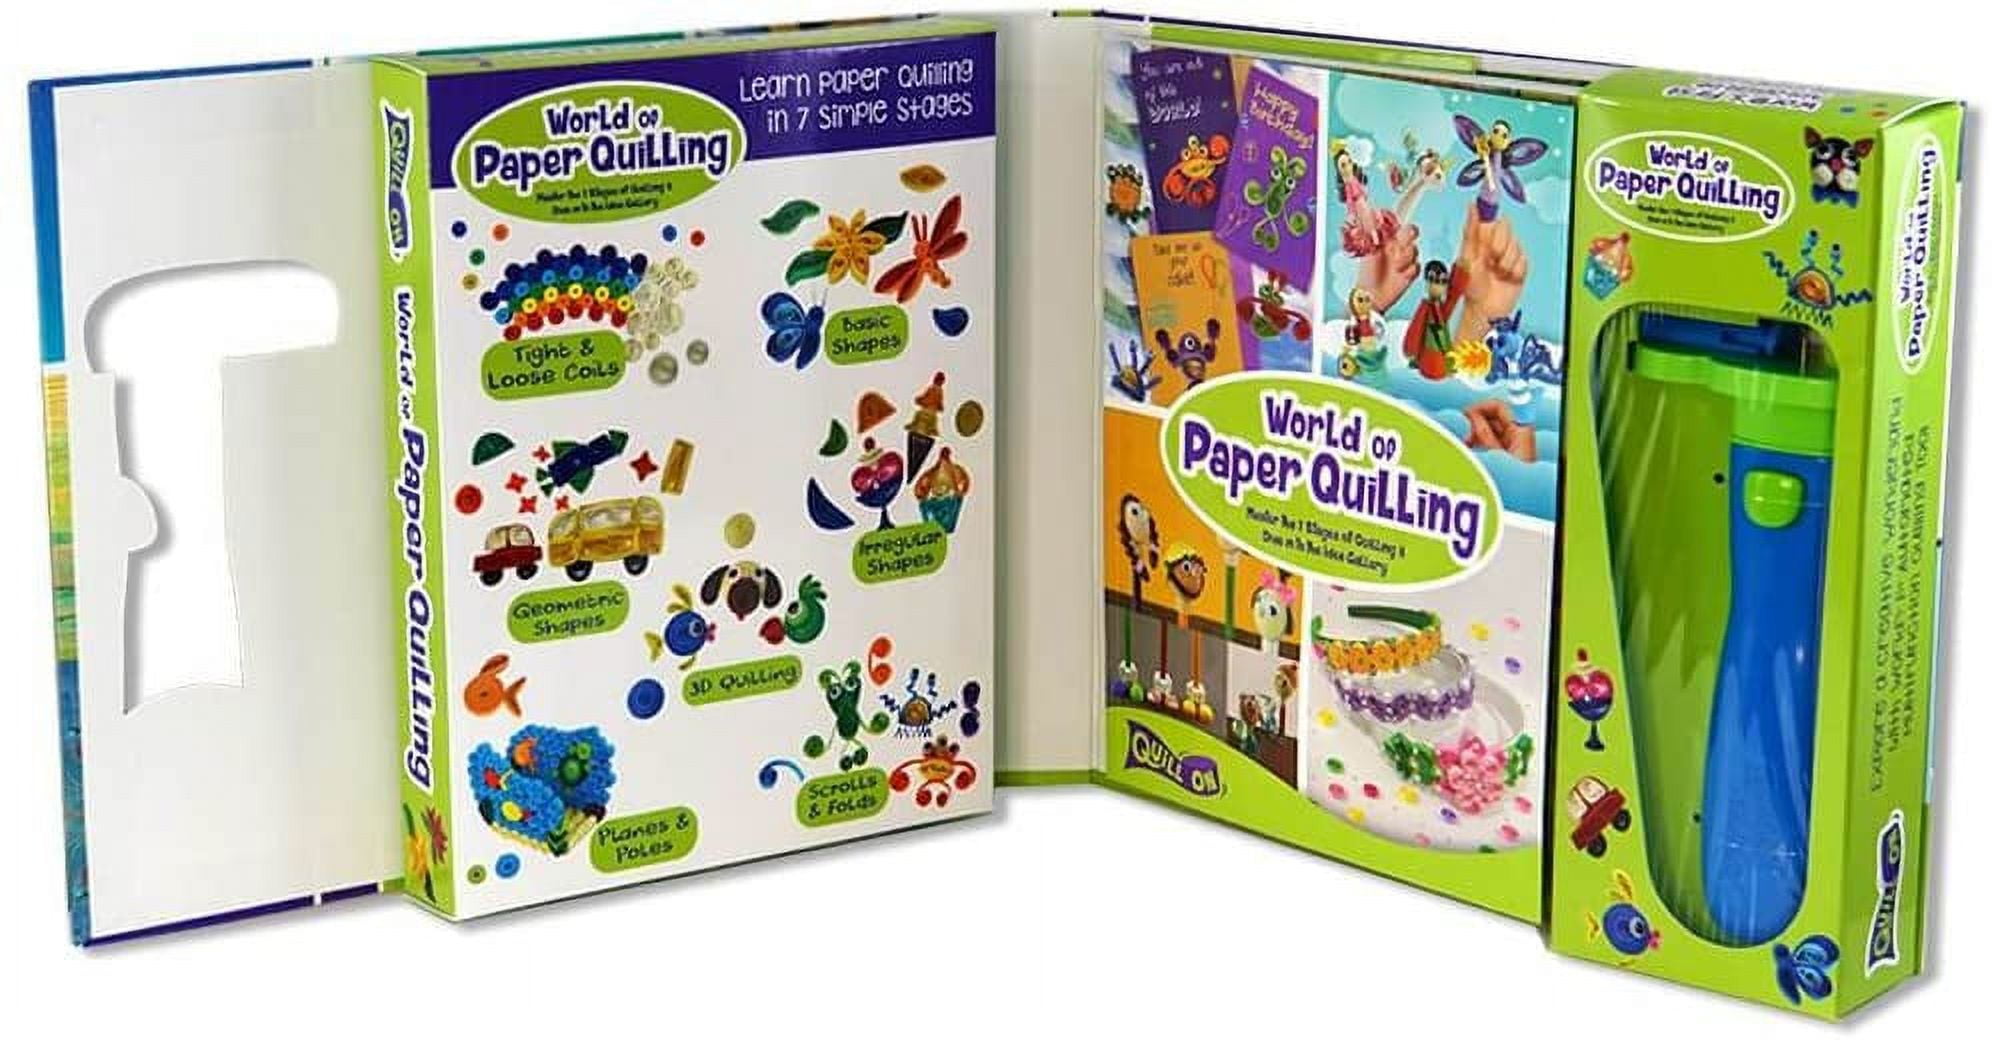 Electric Quilling Tool, Quilling Tools For Beginners